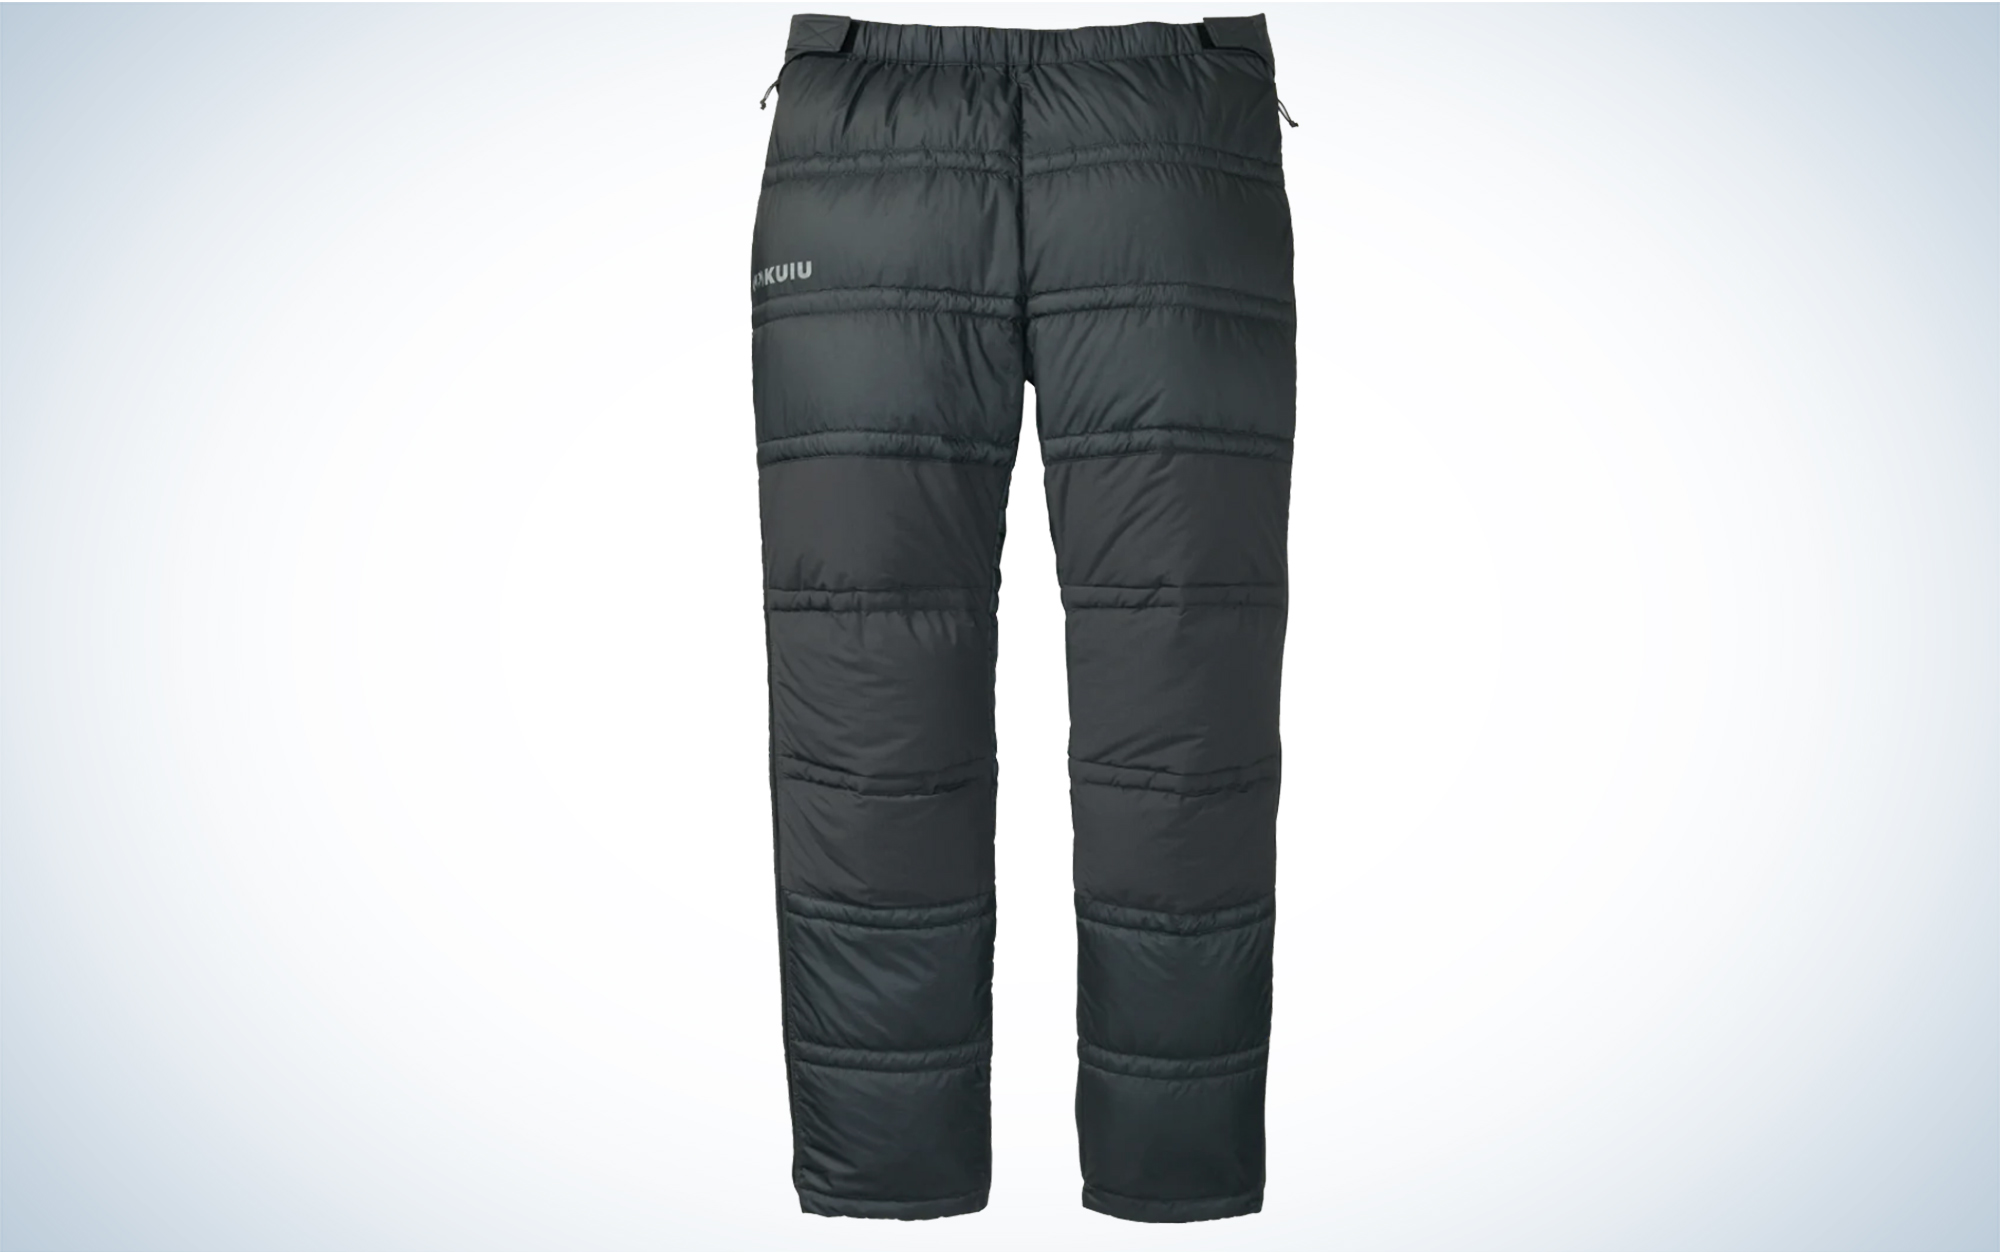 Half Pants Full Pants Review: In The Urge To Keep It Light, The